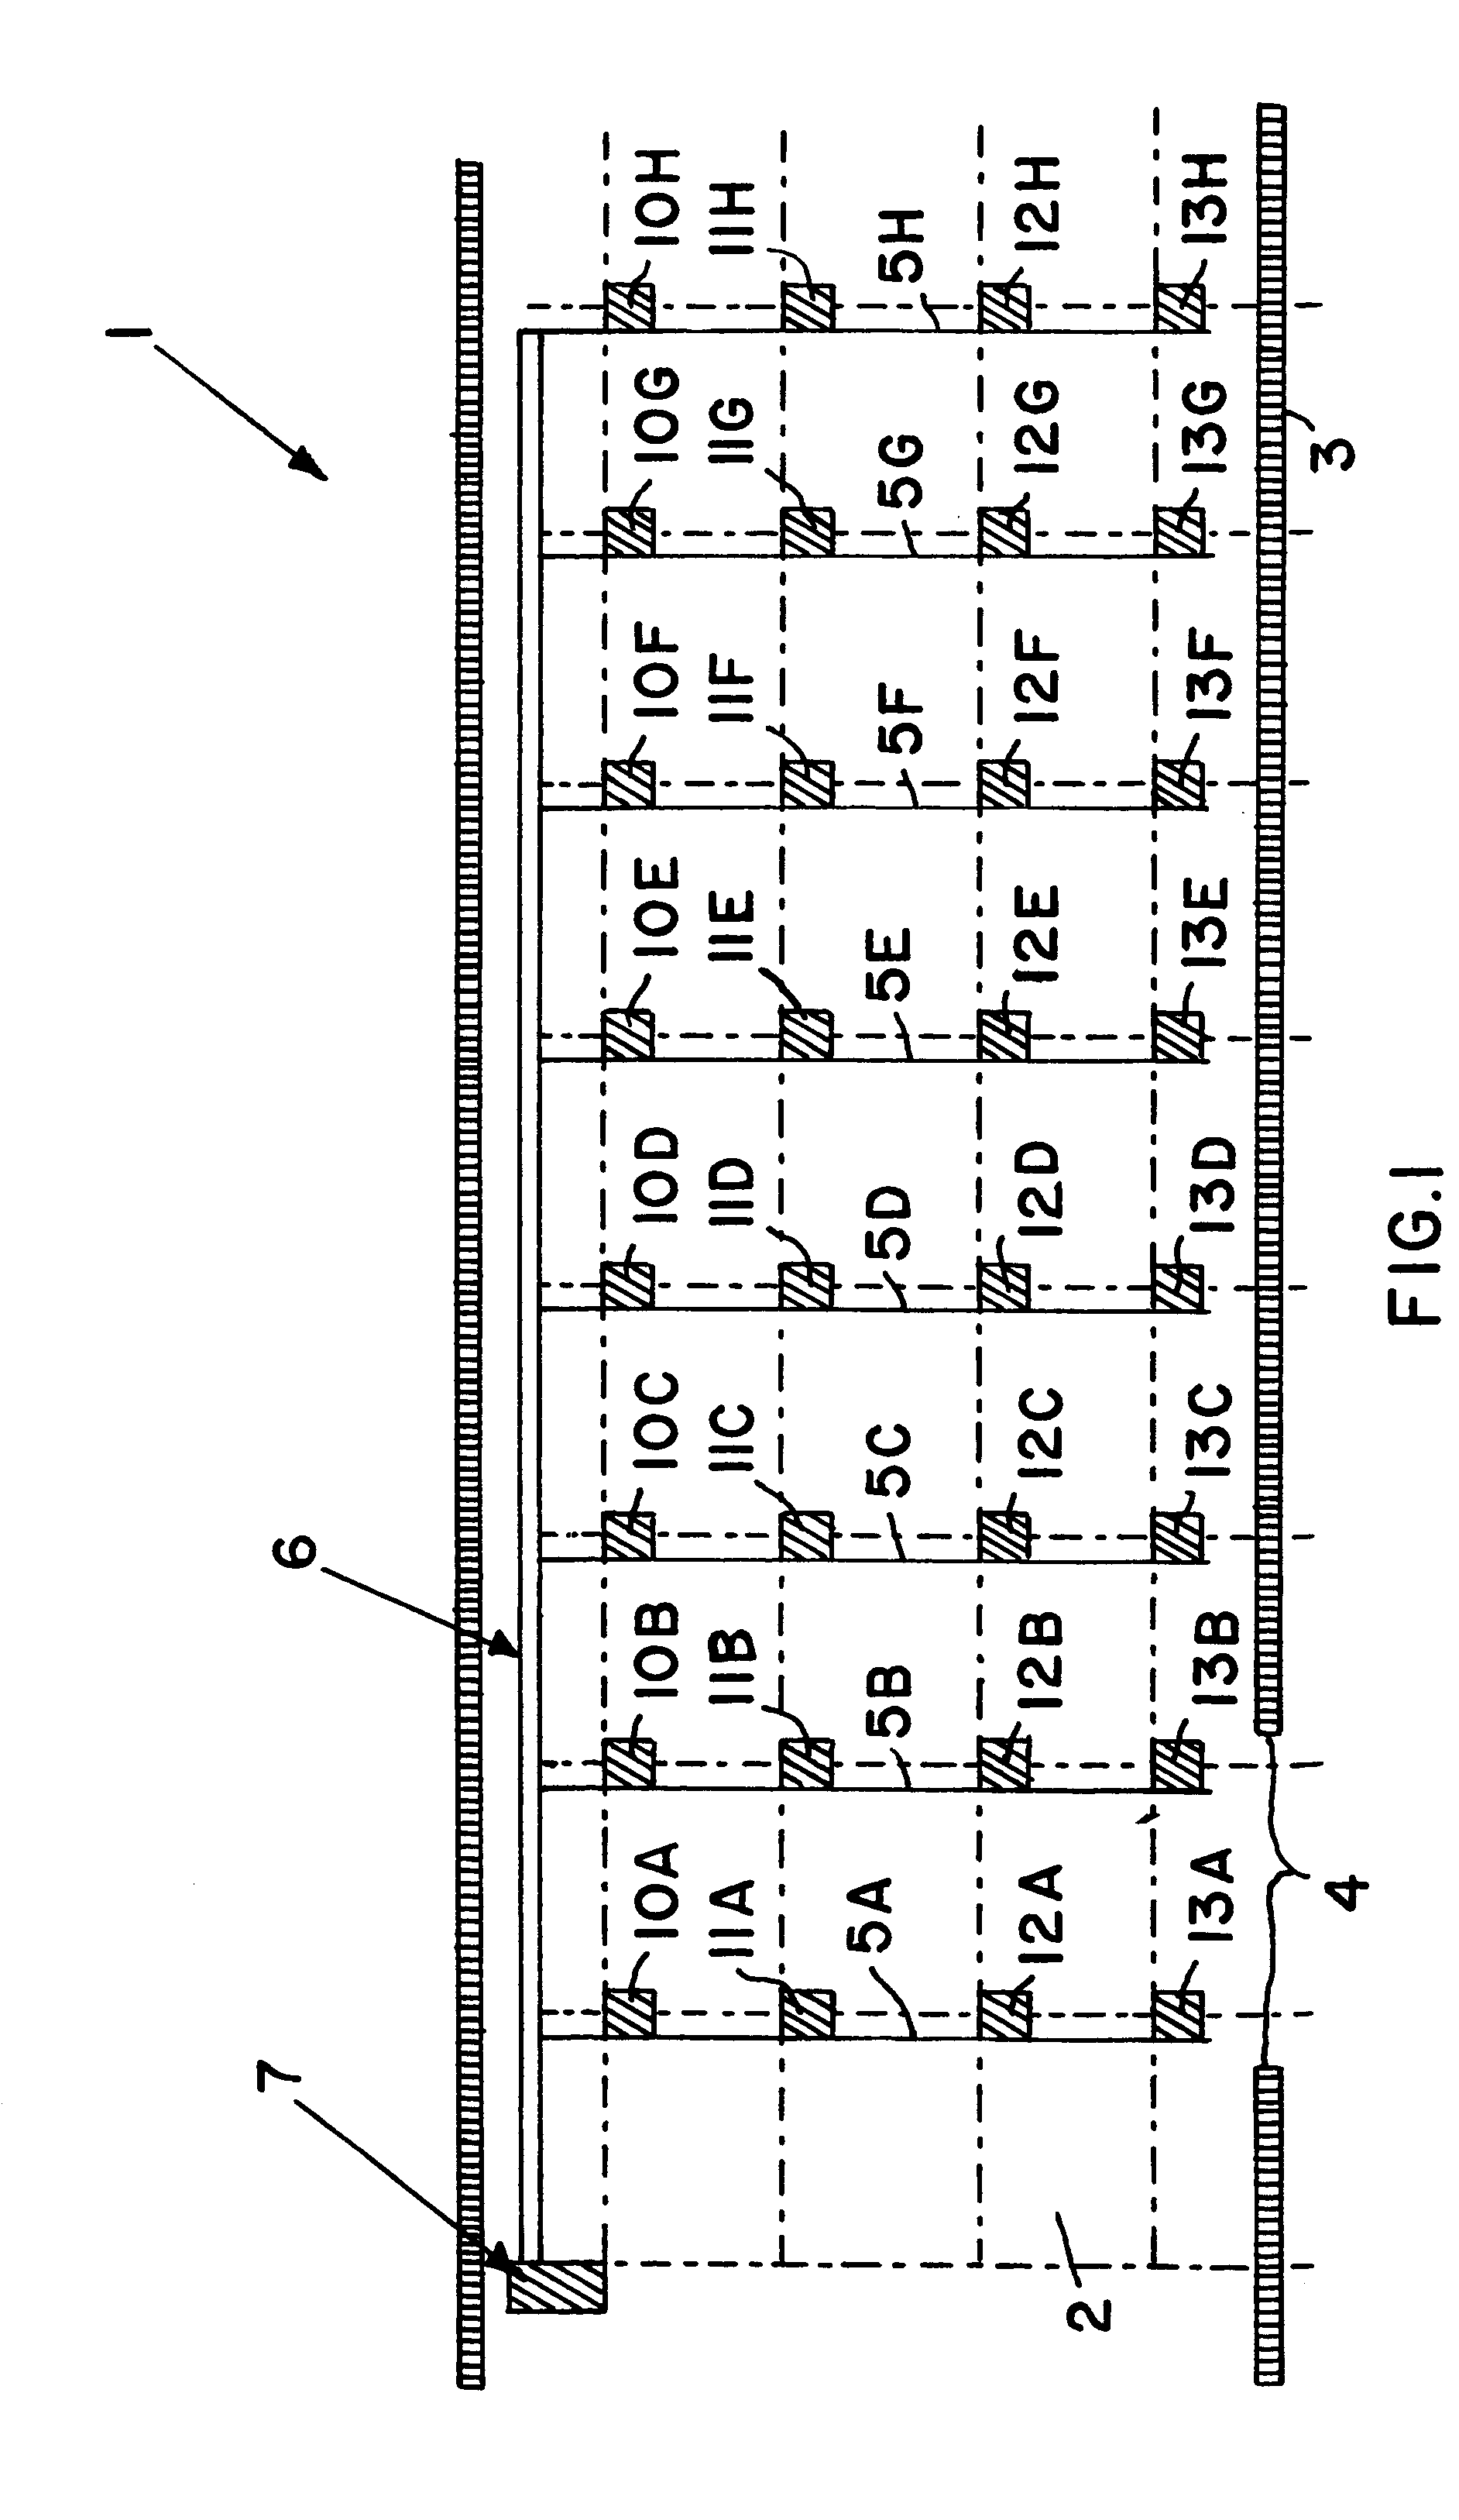 Pneumatically actuated freight loading system for an aircraft